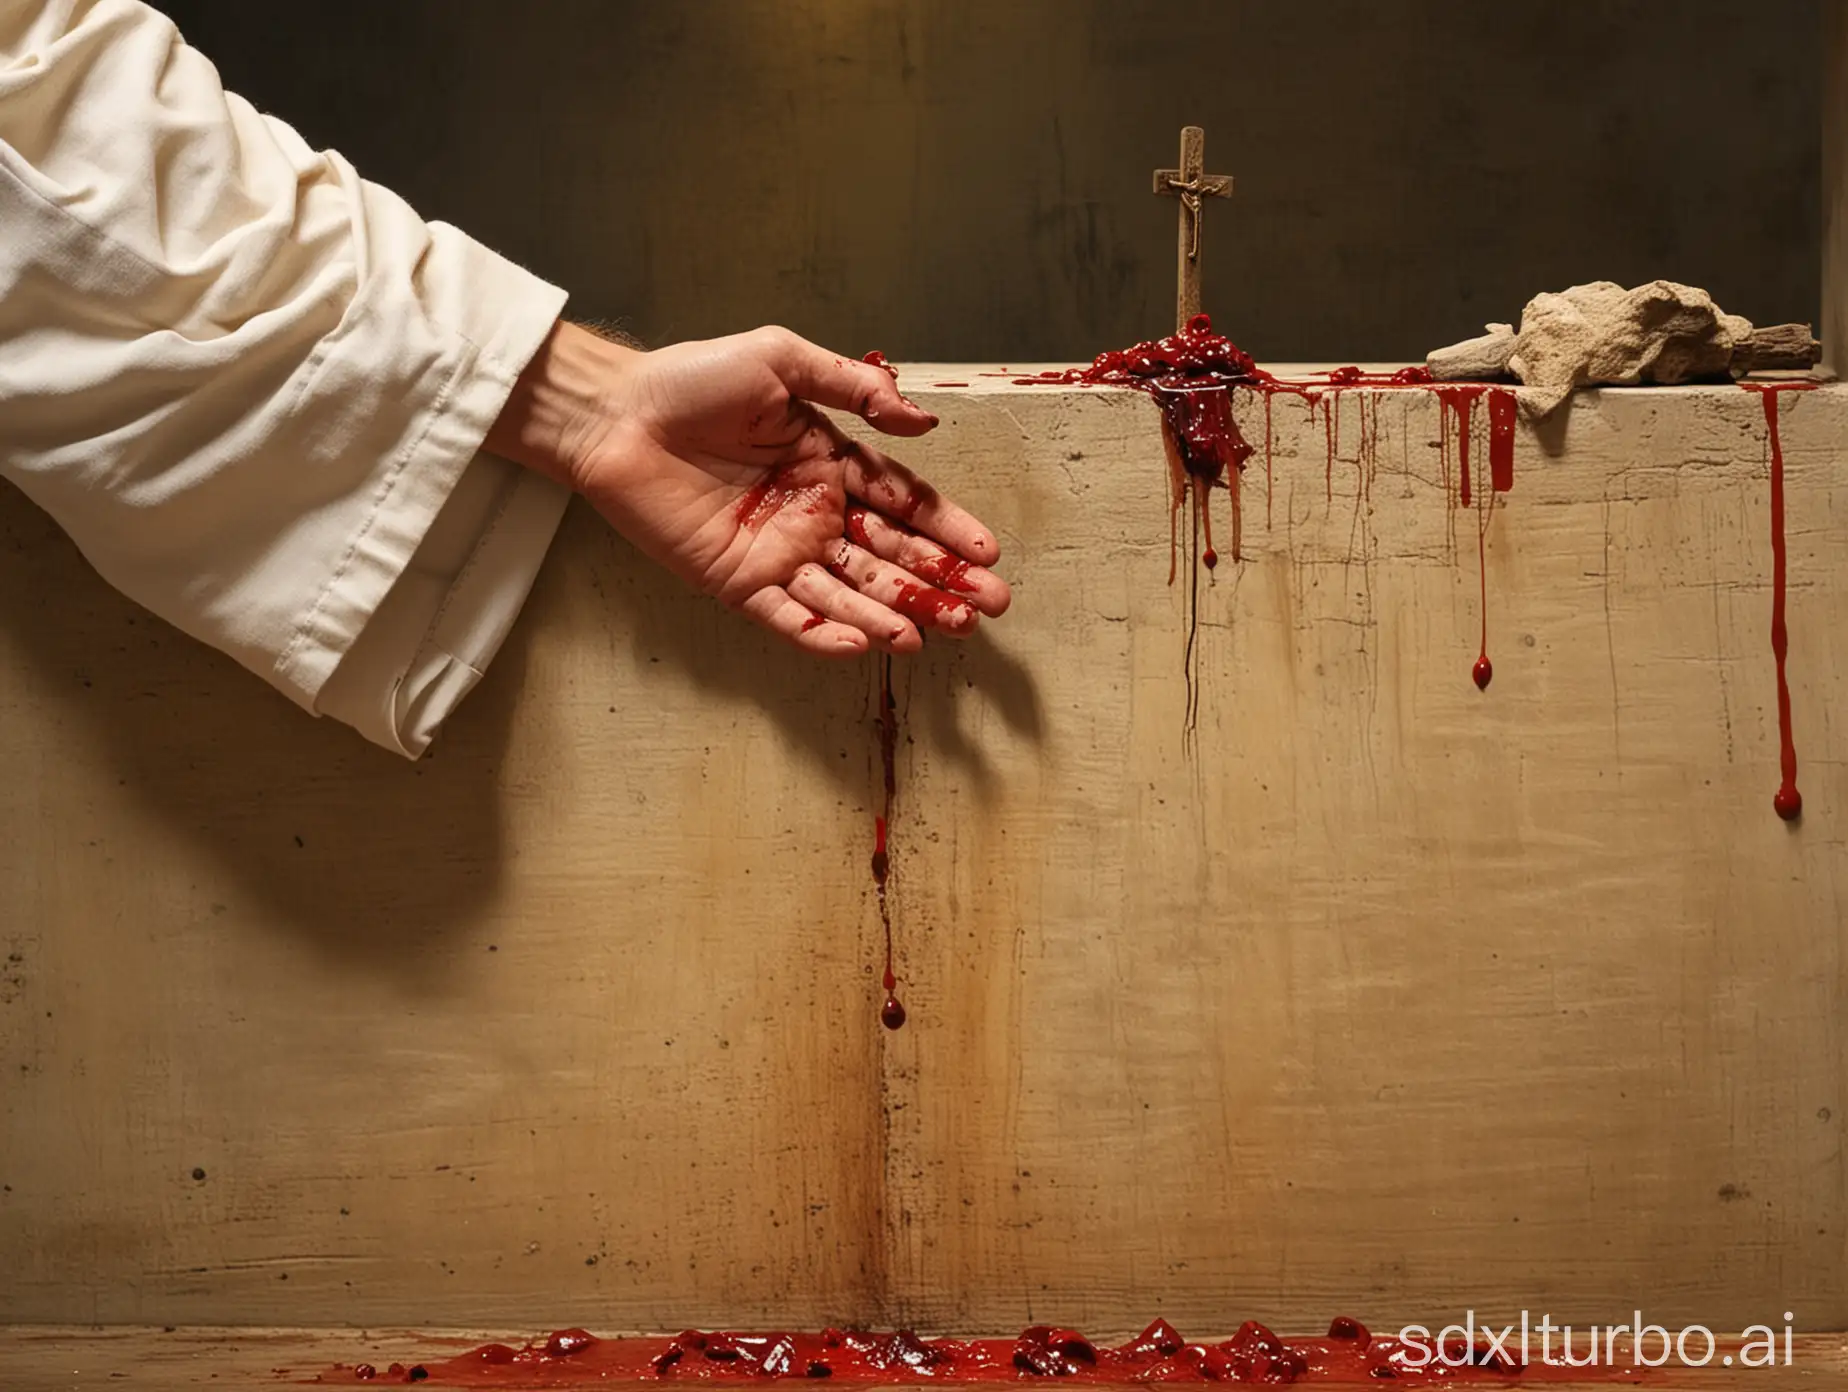 They nailed the hand of Jesus on a nail and the blood was pouring out